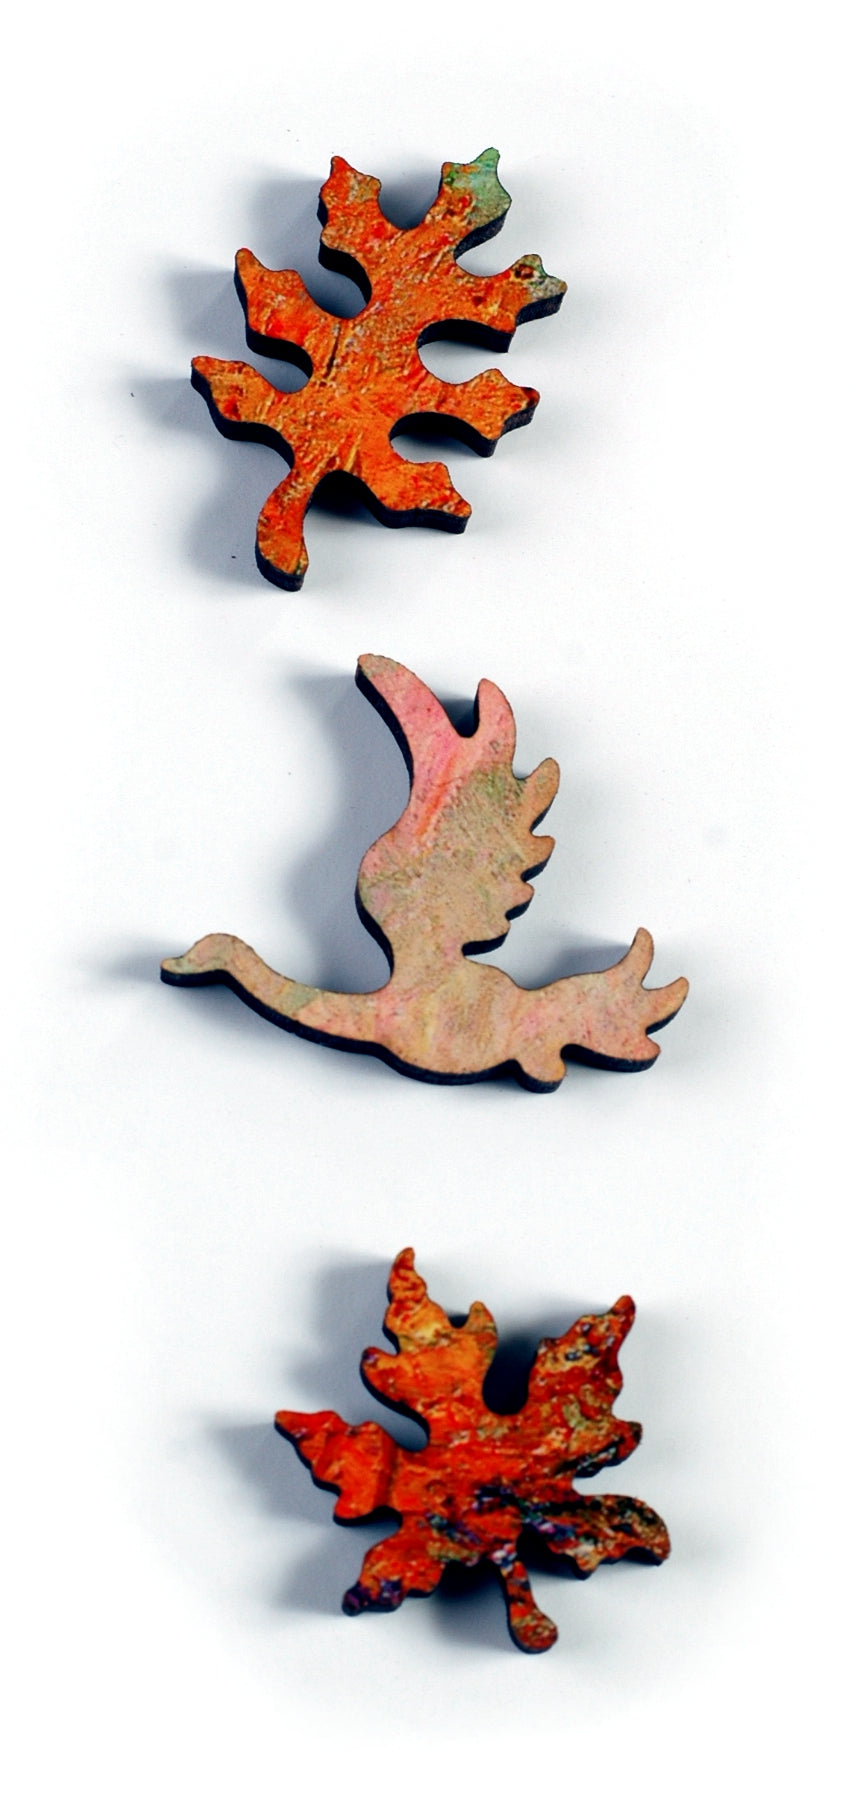 A closeup of pieces showing a bird and two leaves.